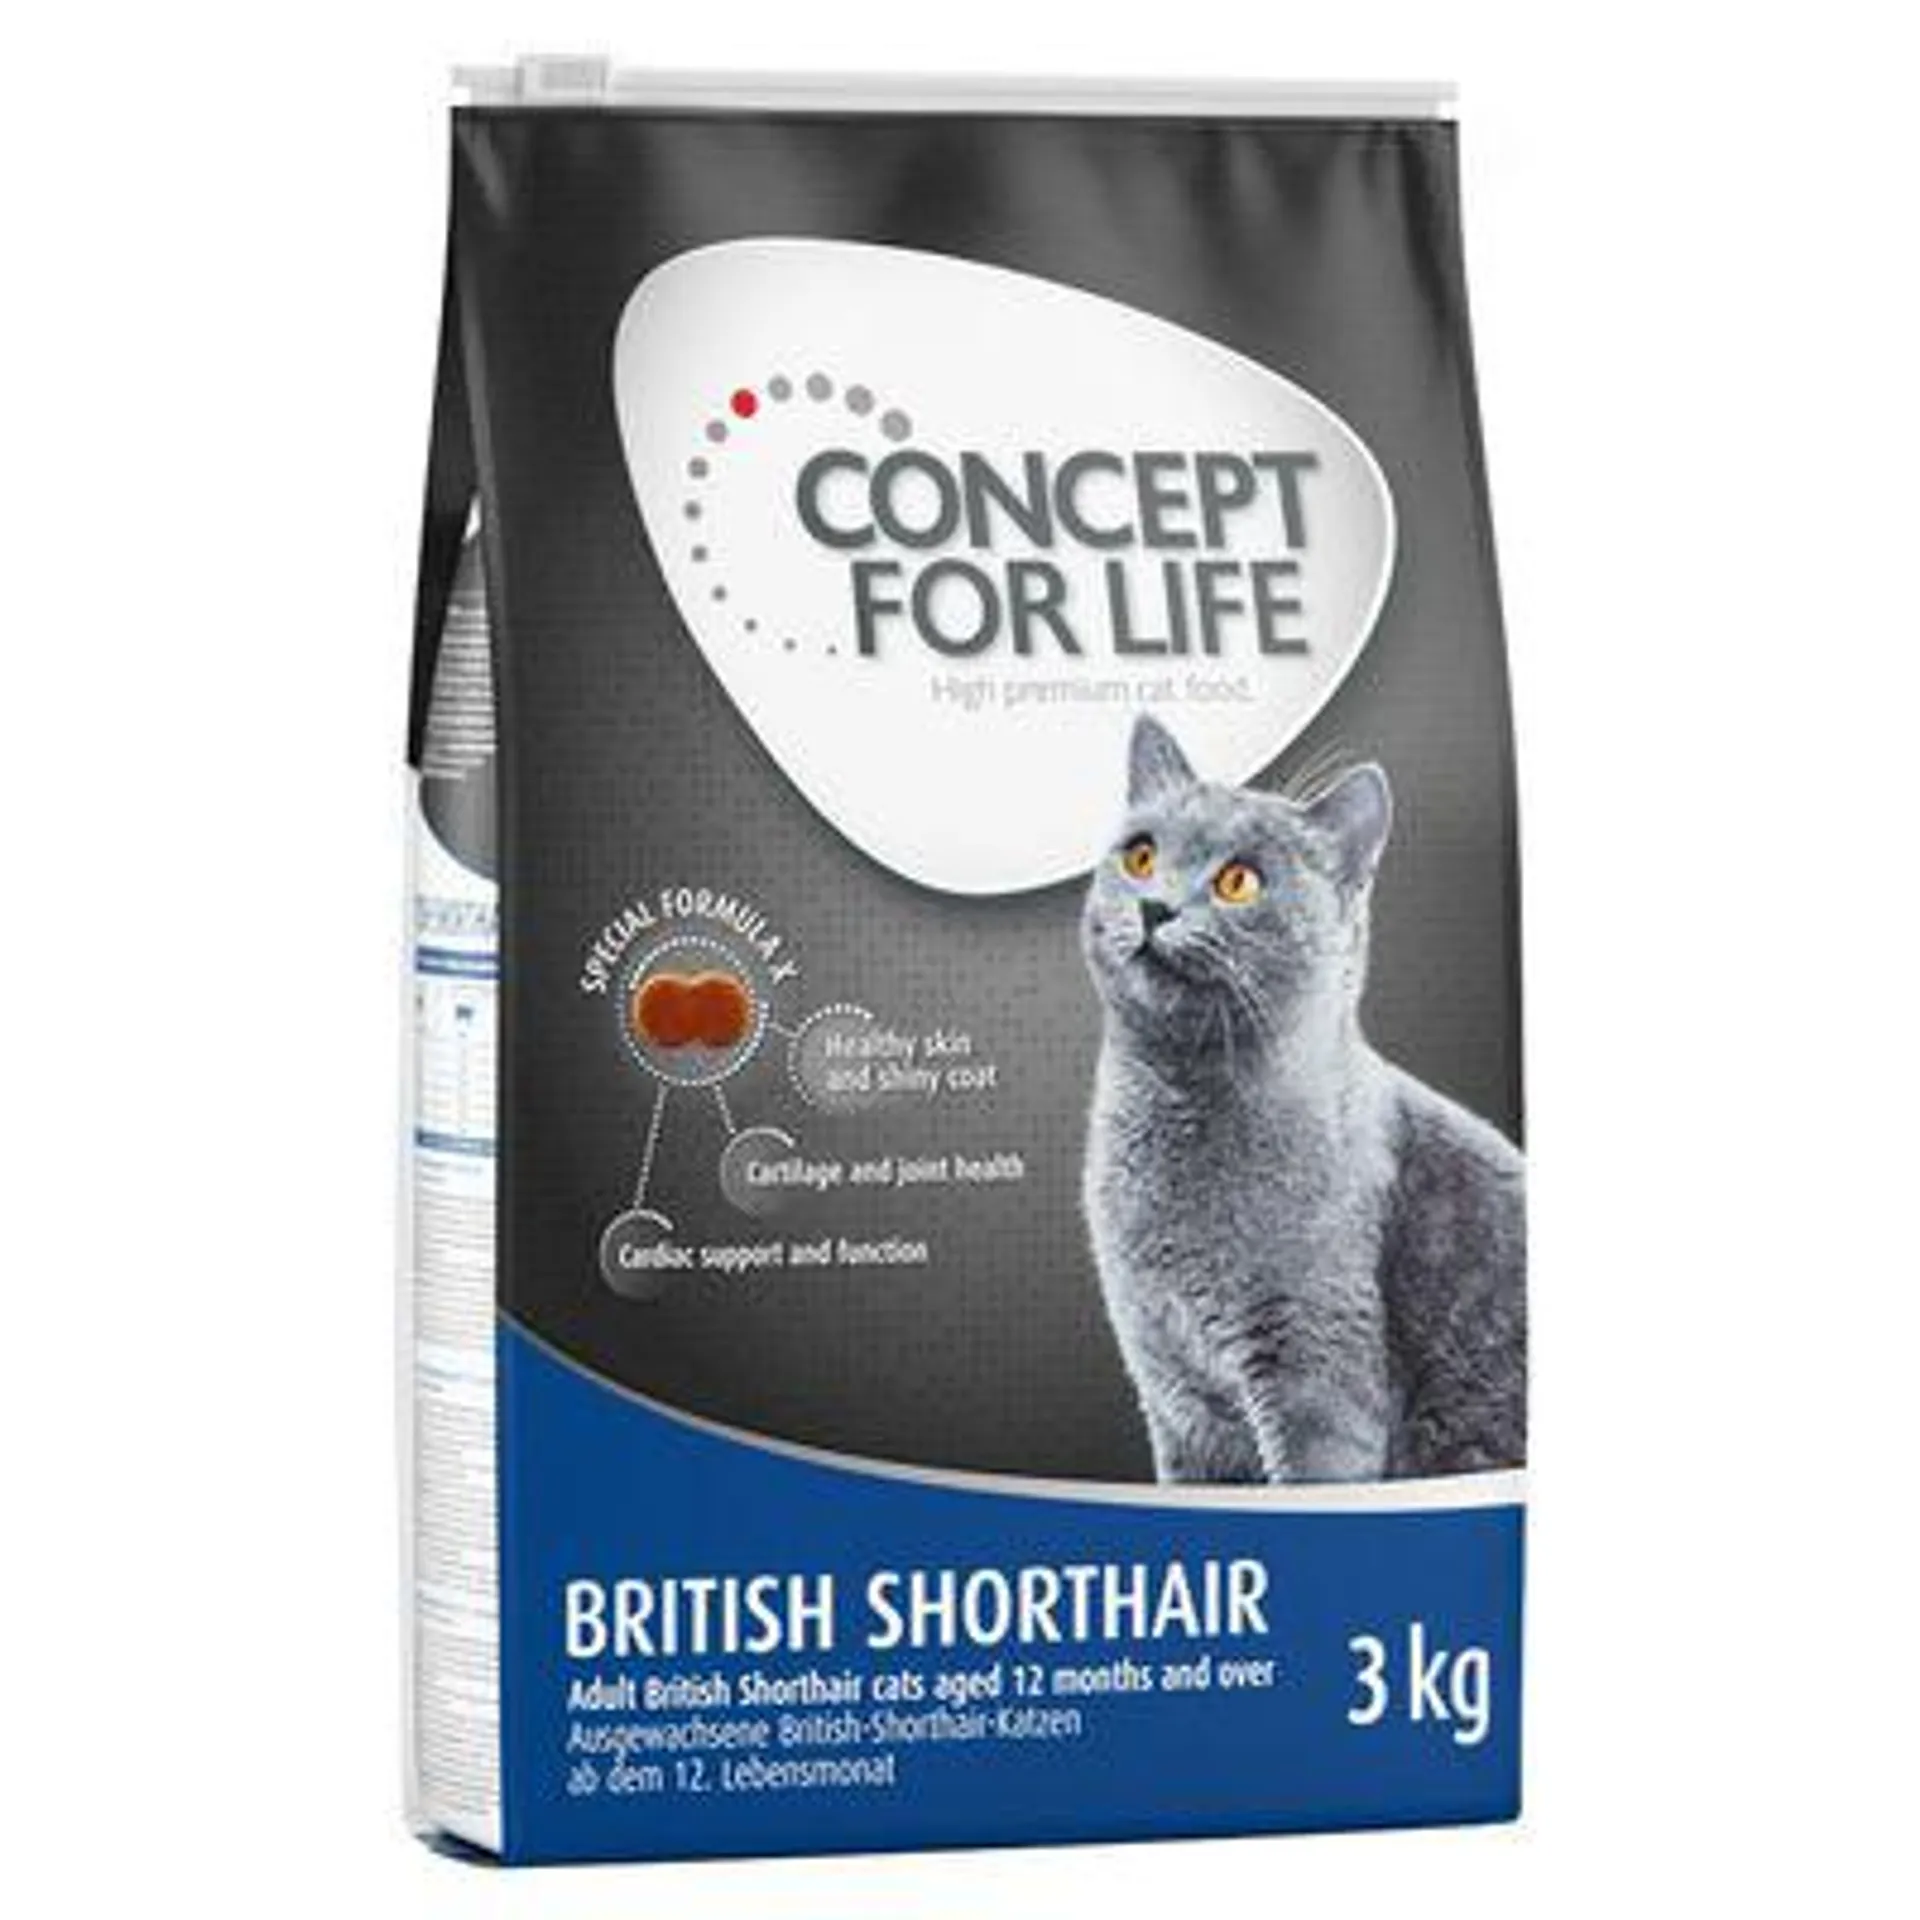 3kg Concept for Life Dry Cat Food - Special Price!*